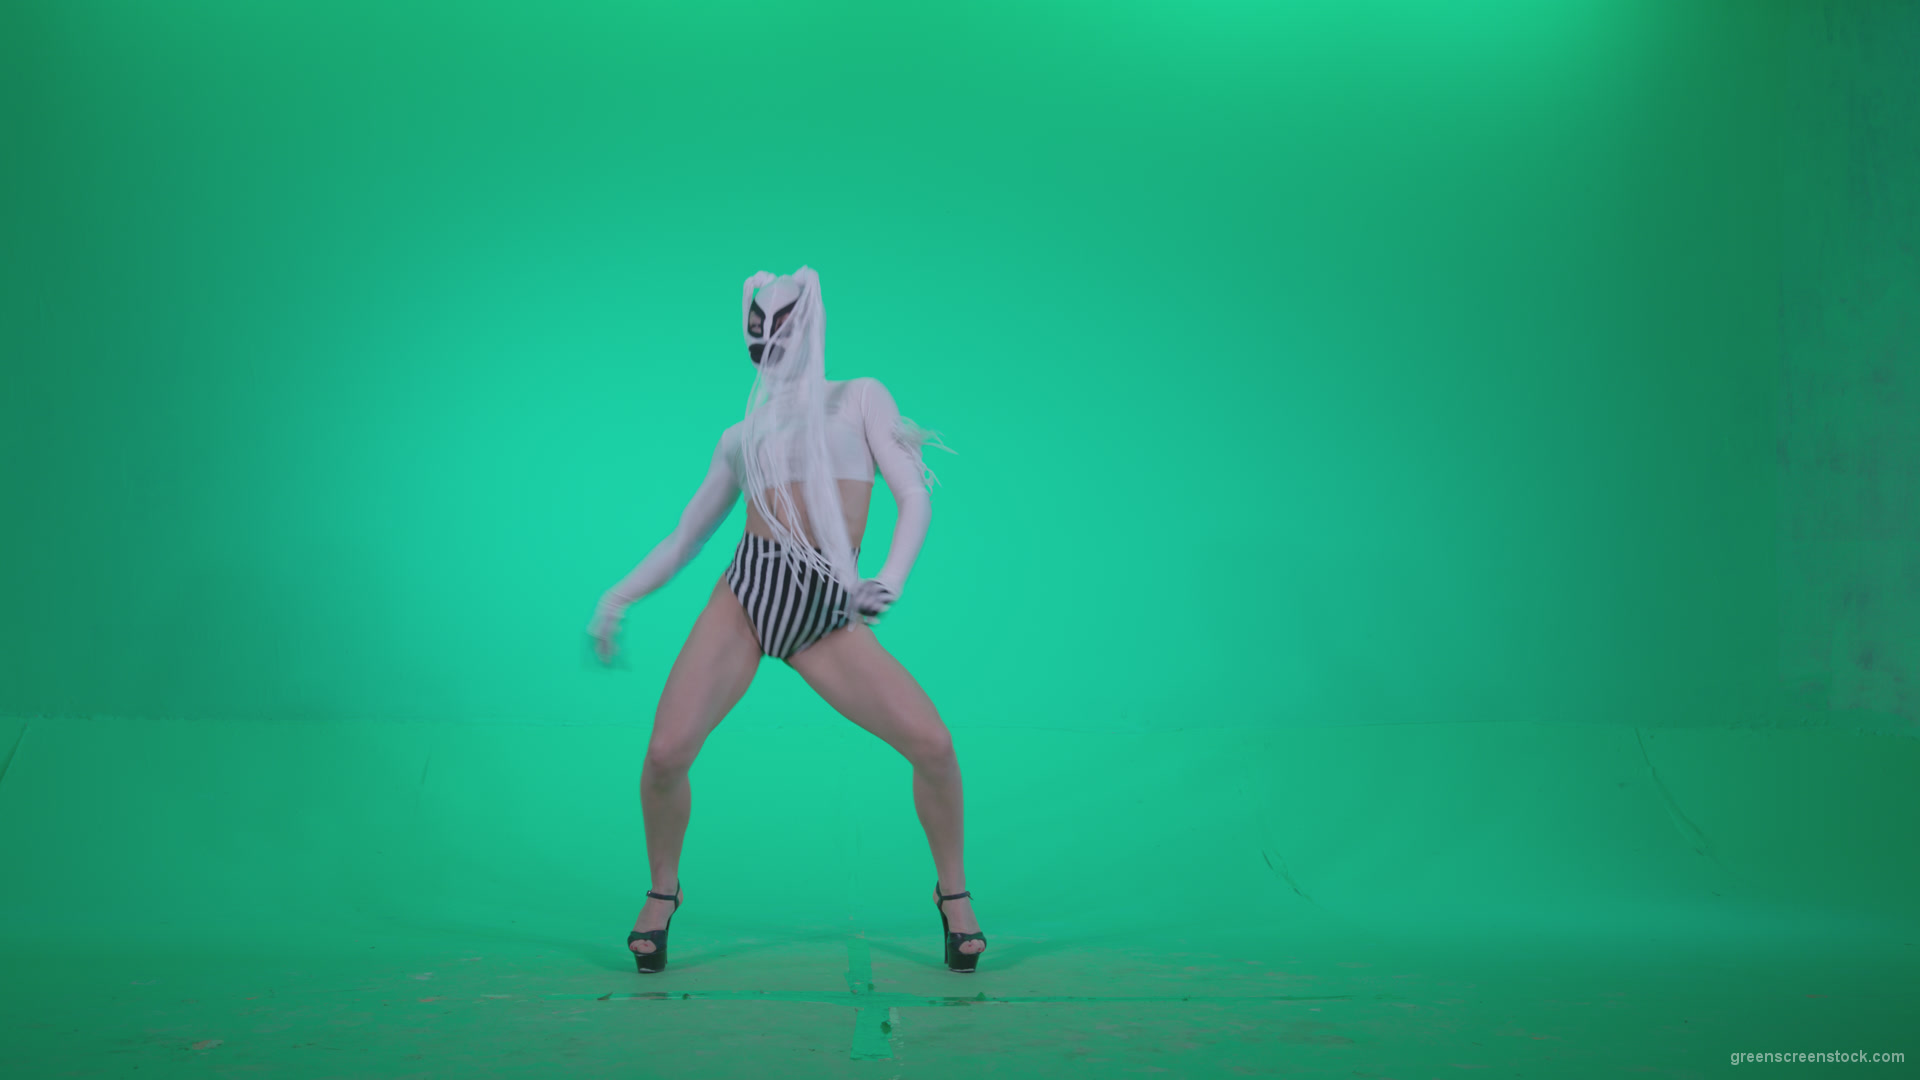 Go-go-Dancer-with-Latex-Top-t1-Green-Screen-Video-Footage_009 Green Screen Stock